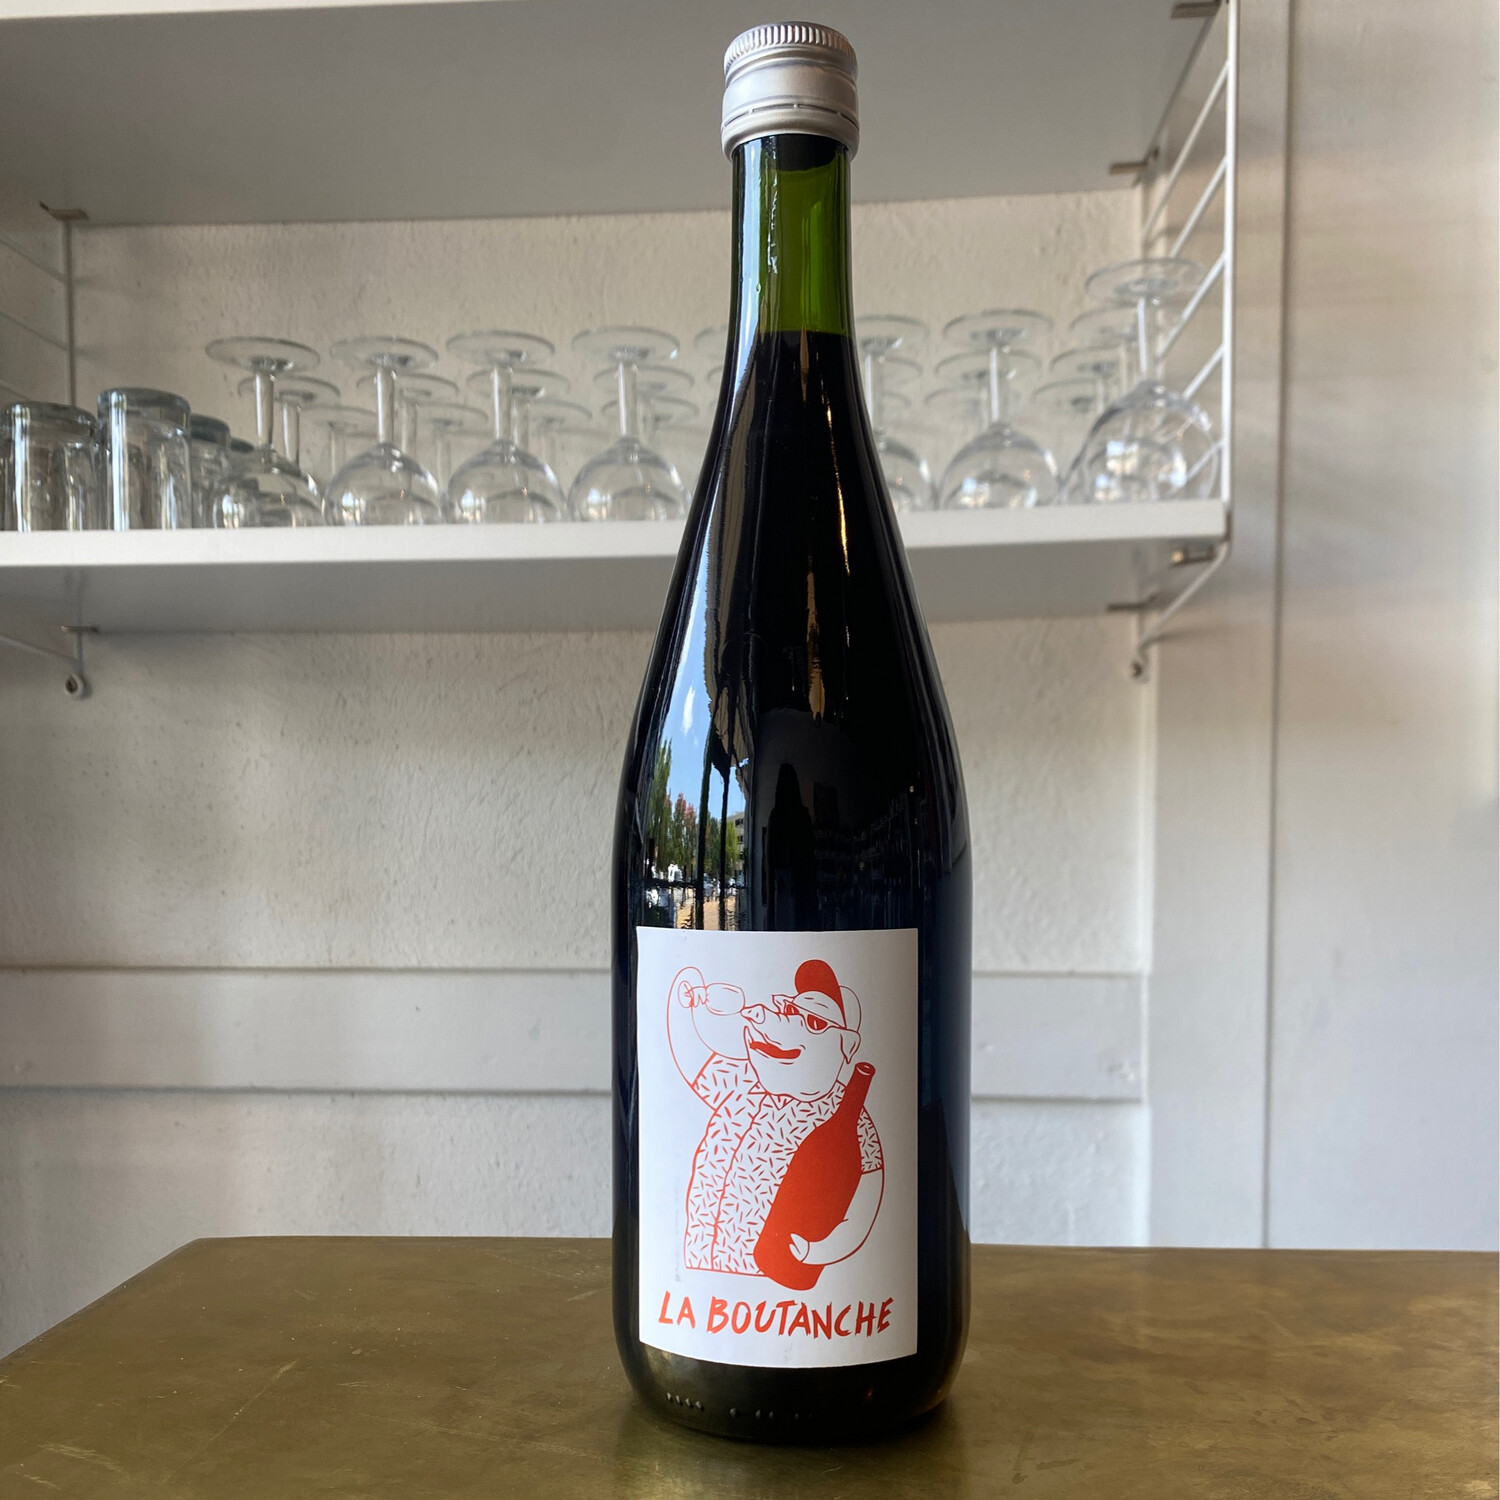 Olivier Minot, 'La Boutanche' Gamay 1L (2020)